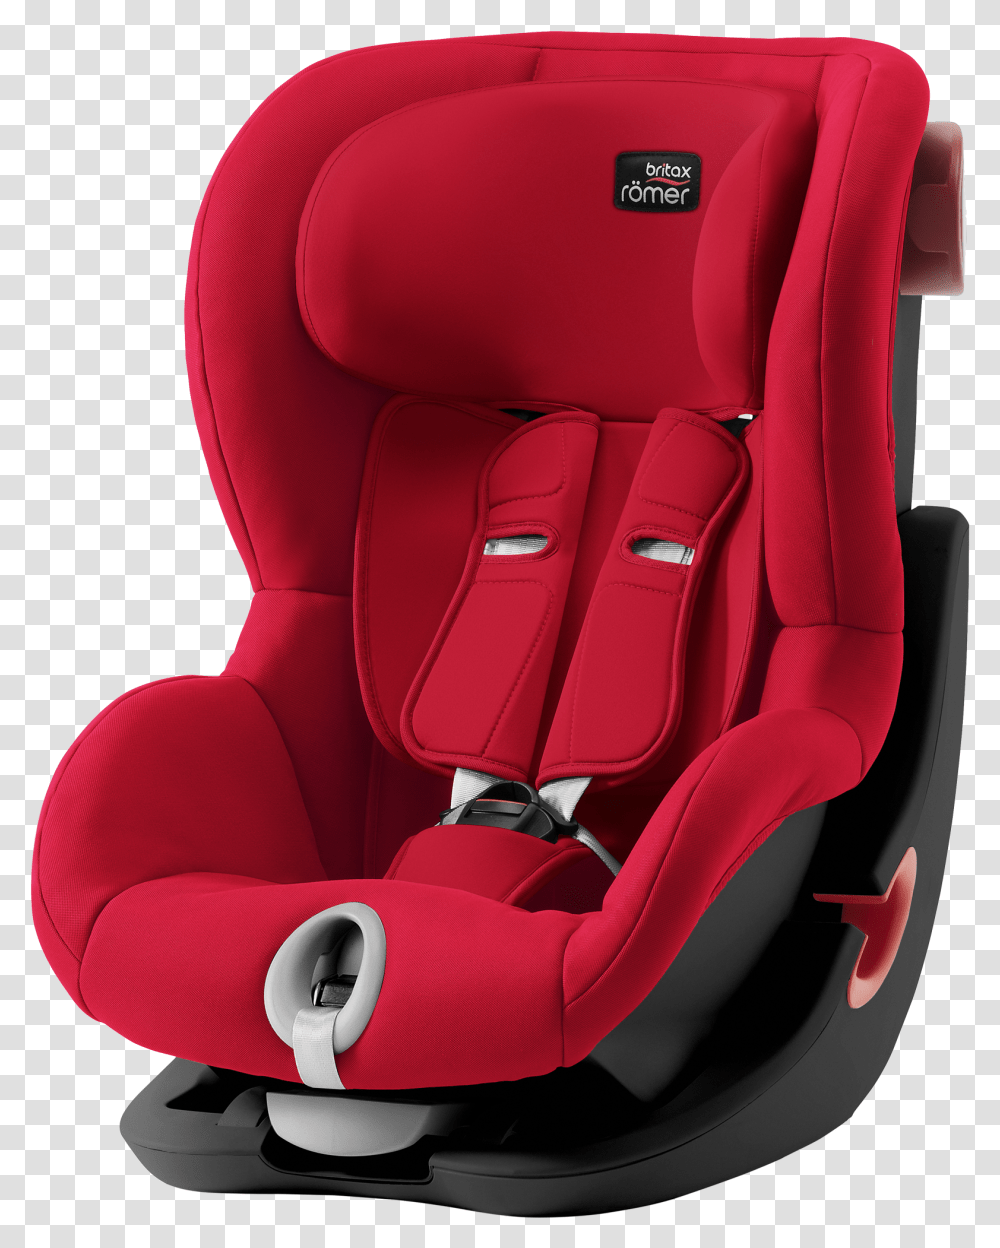 King Chair Images Britax Rmer King Ii 55564 Vippng Britax Red Car Seat, Cushion Transparent Png